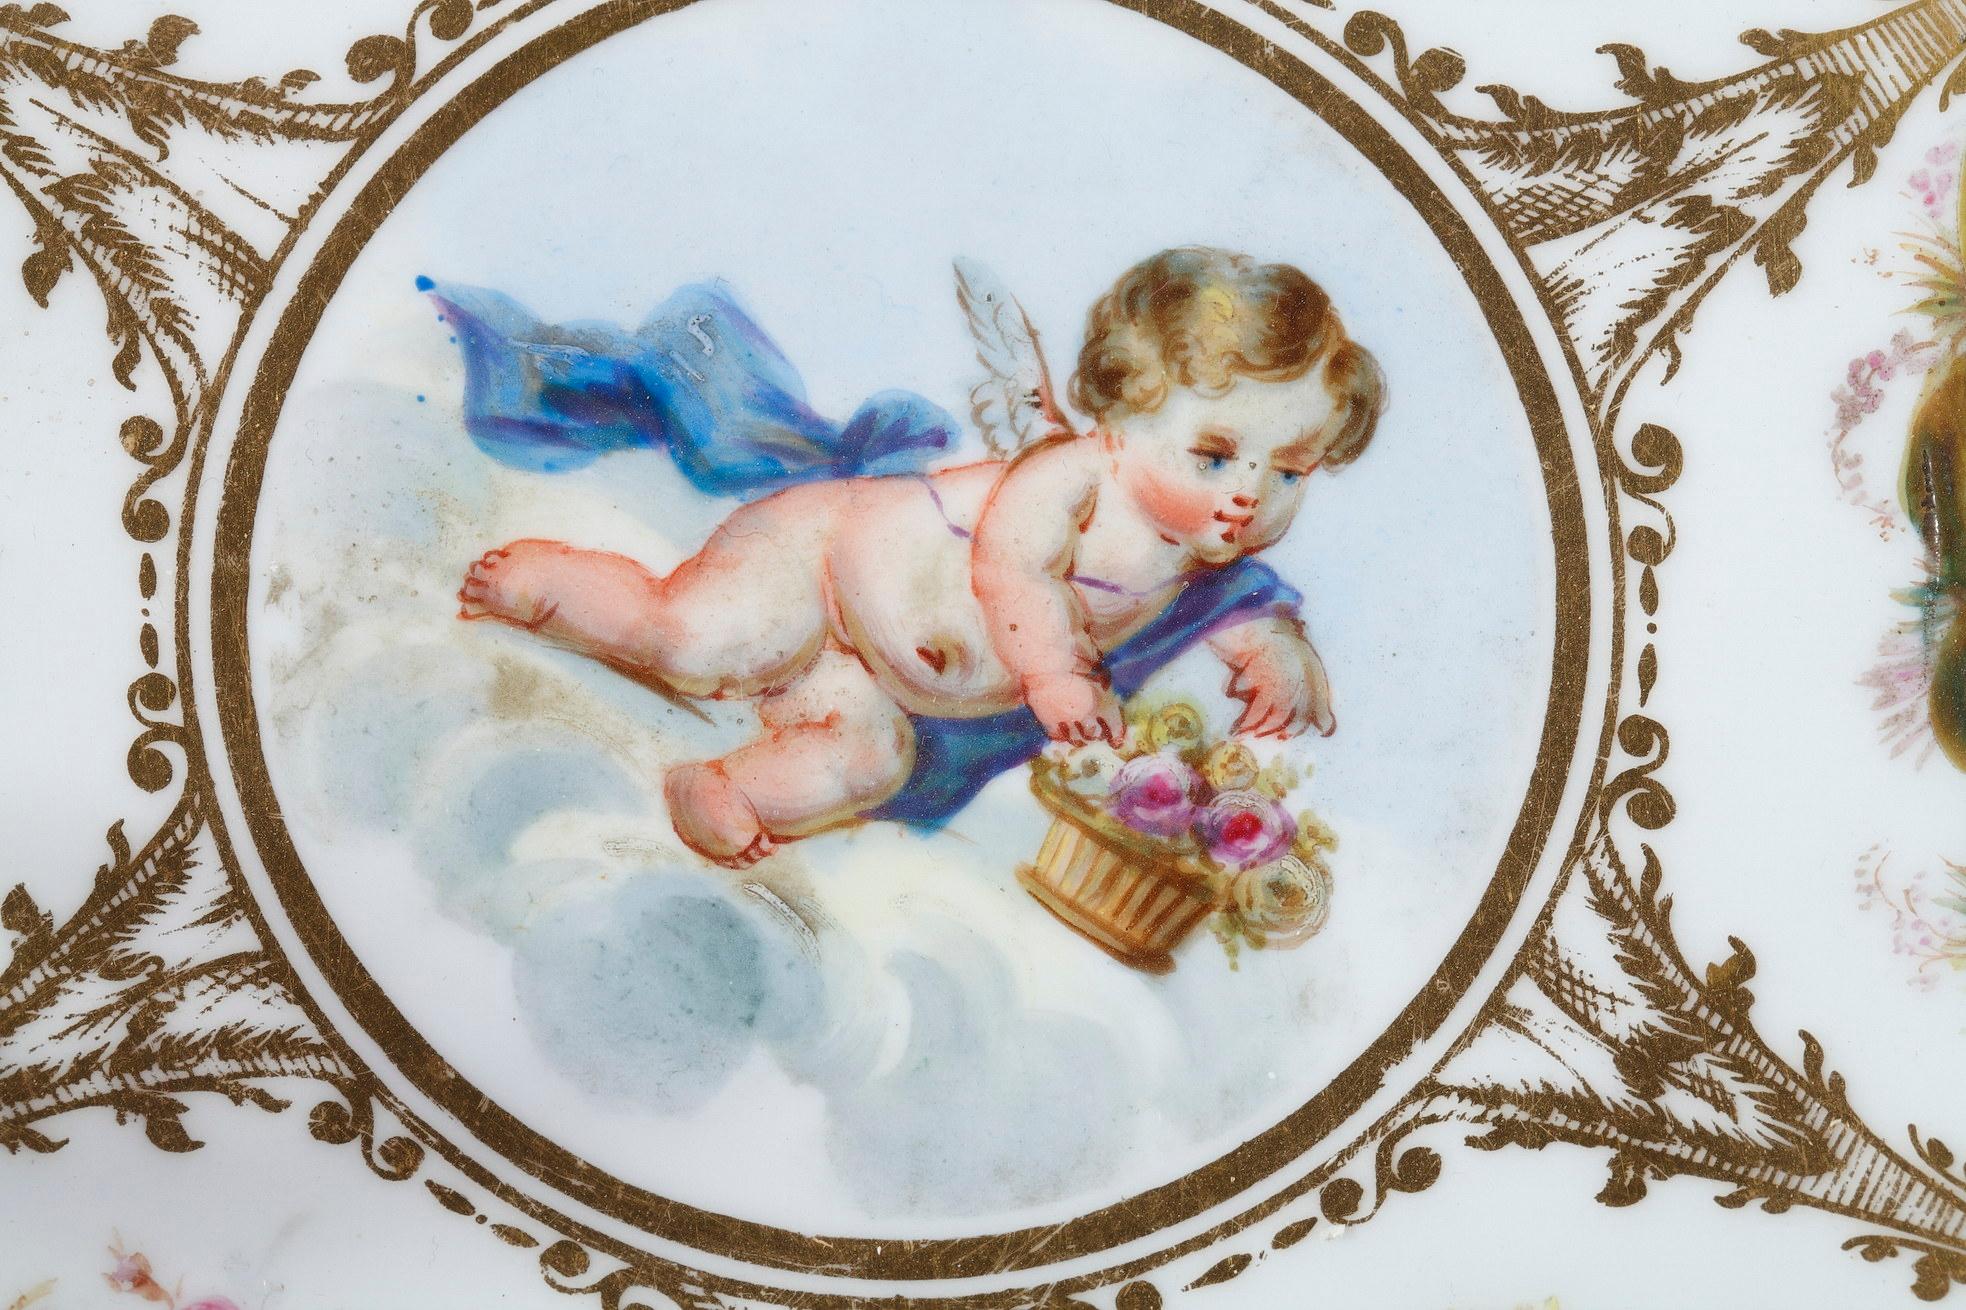 Bronze Bowl in Sèvres Porcelain Decorated with a Cupid from the Louis-Philippe Period